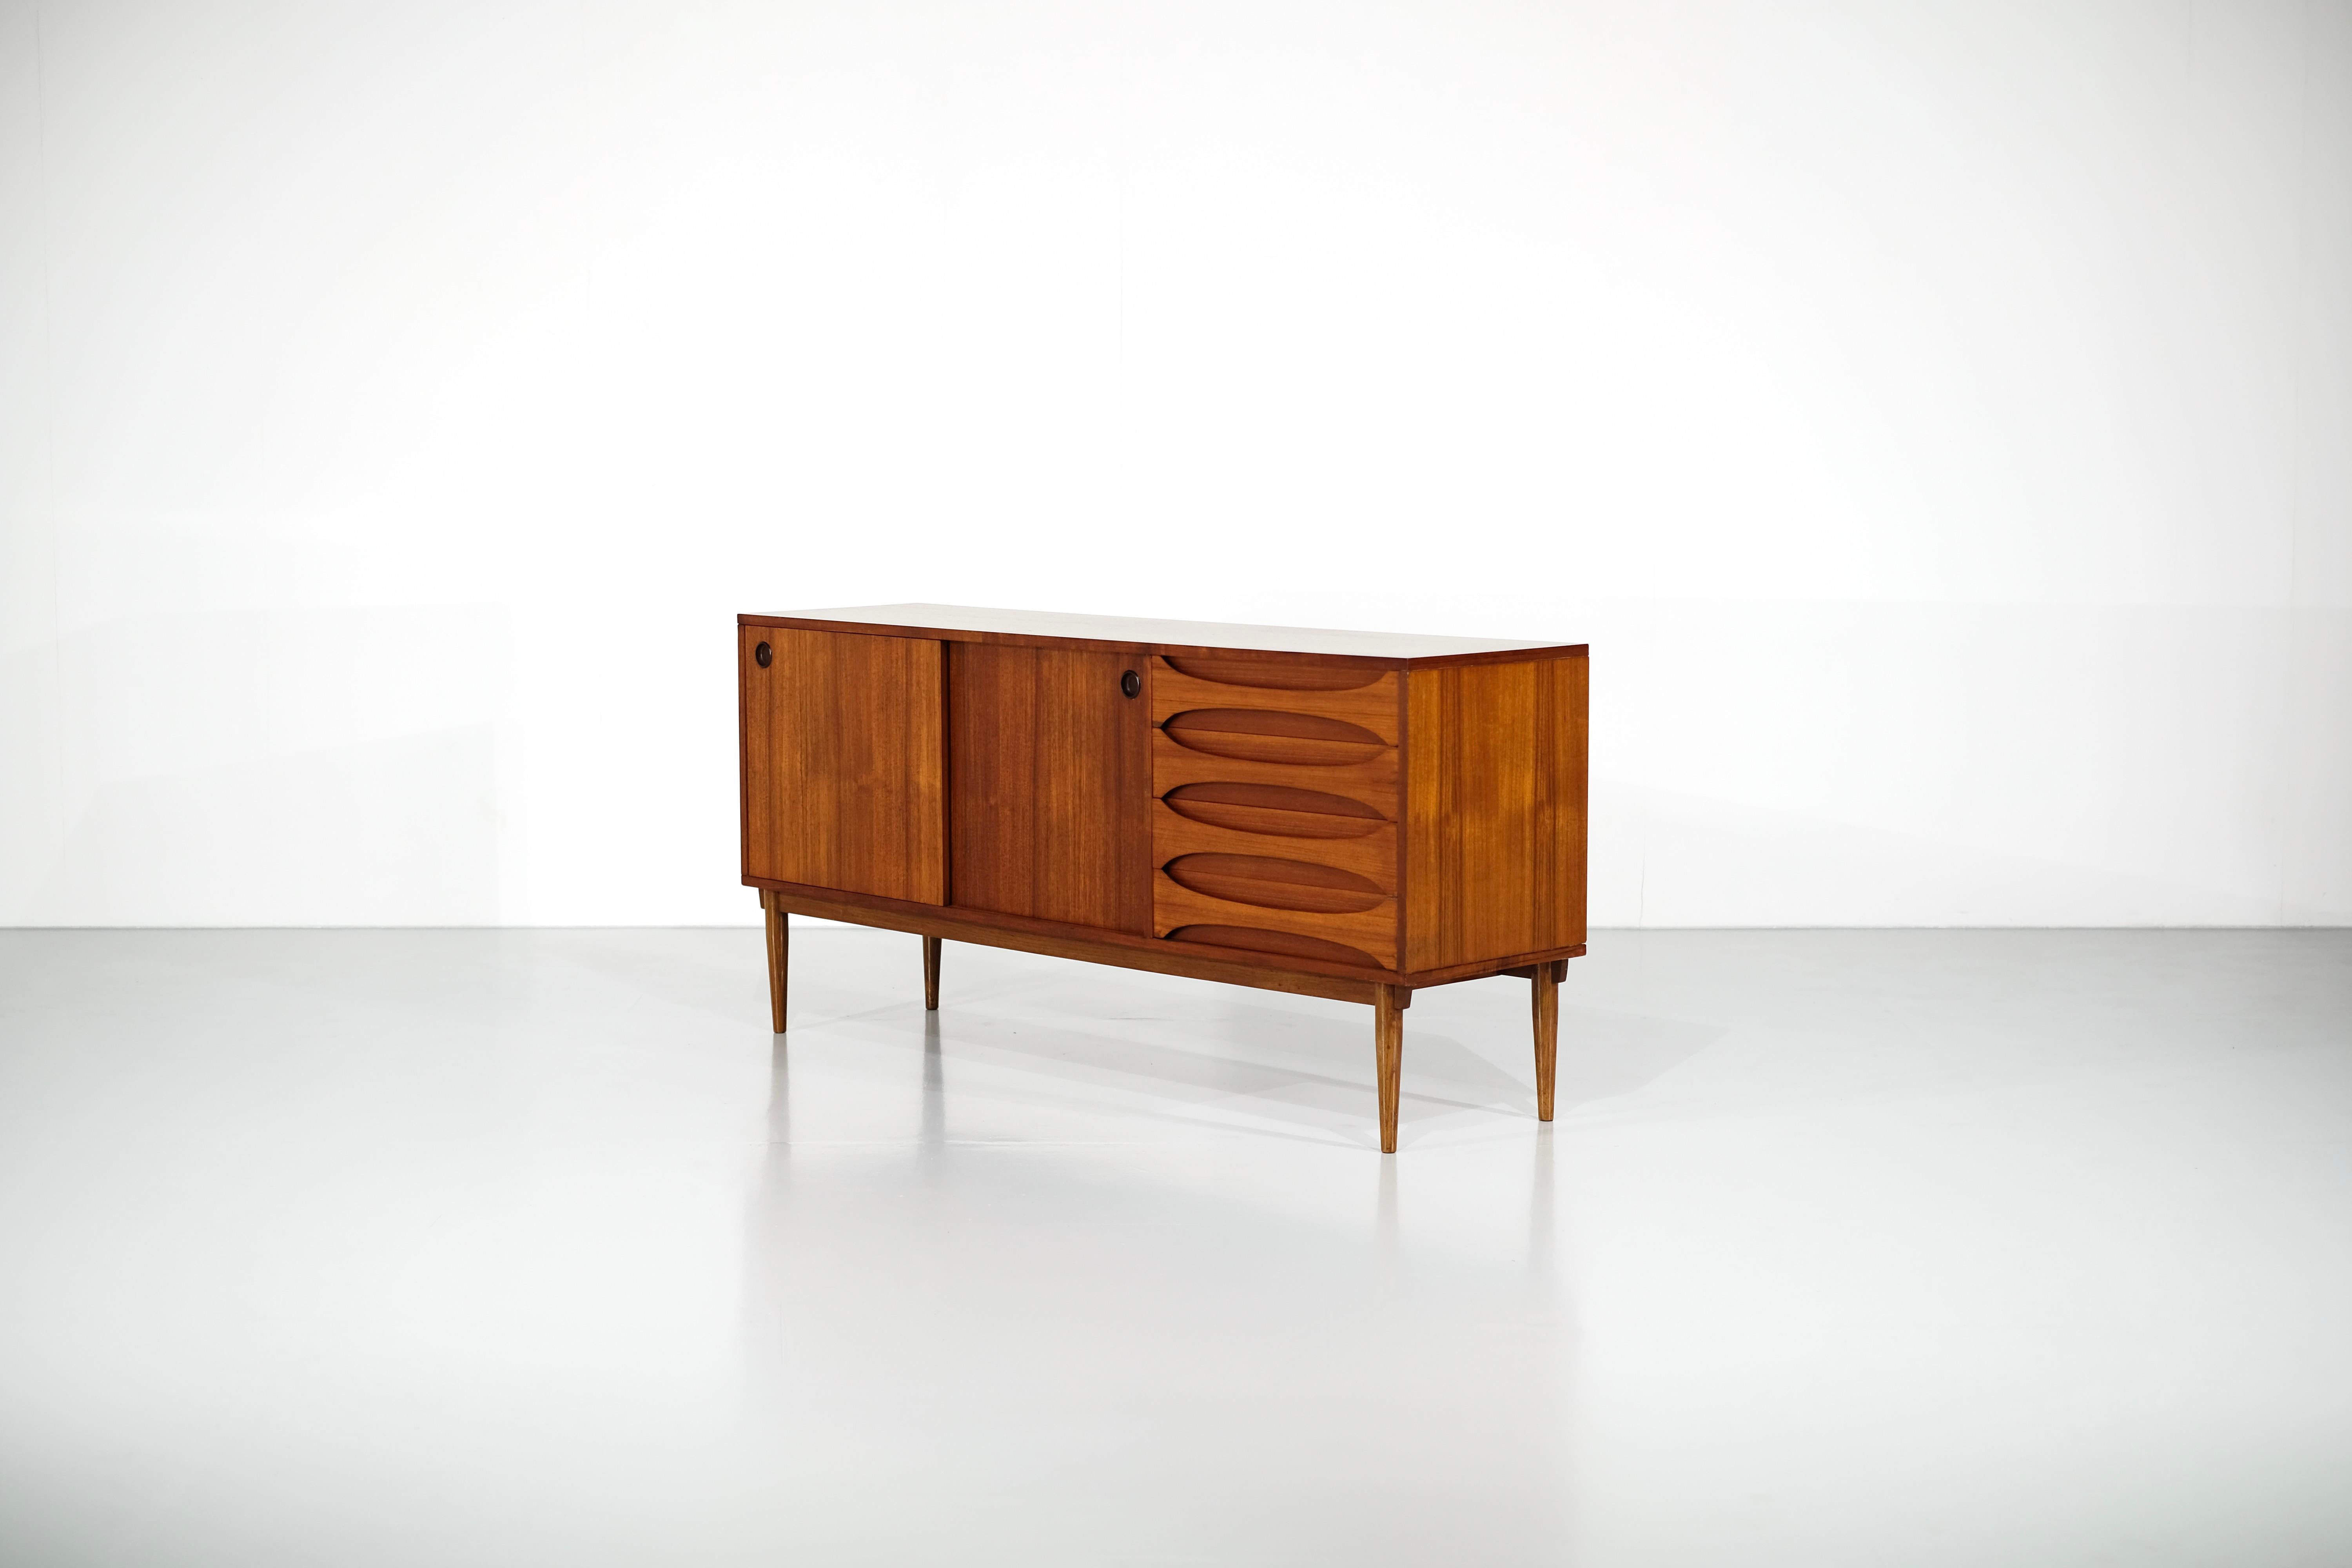  Sideboard in Wood medium size 1960's For Sale 7